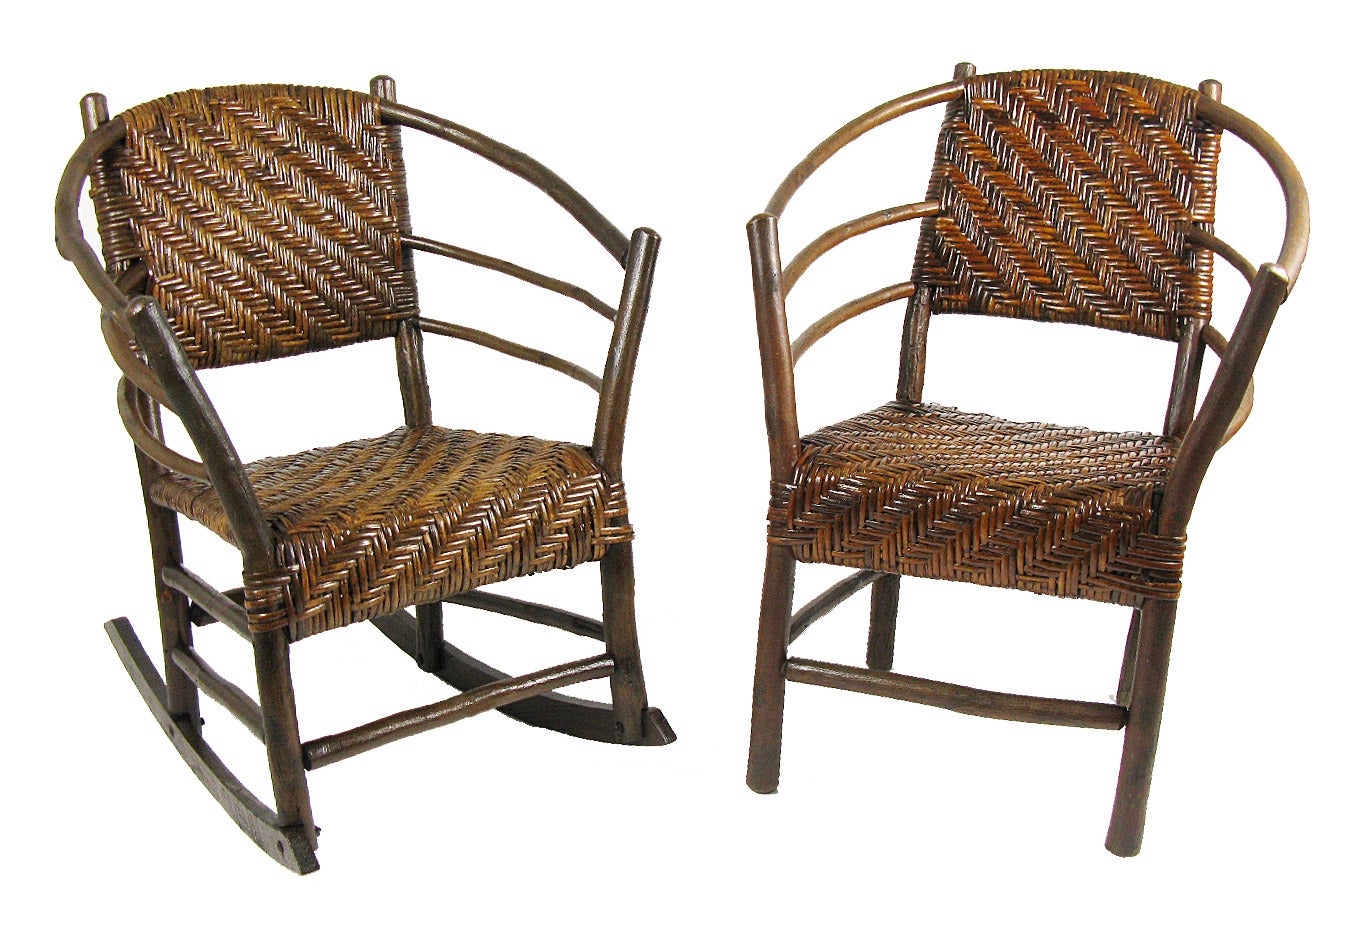 Pair of Old Hickory Hoop Arm Chairs